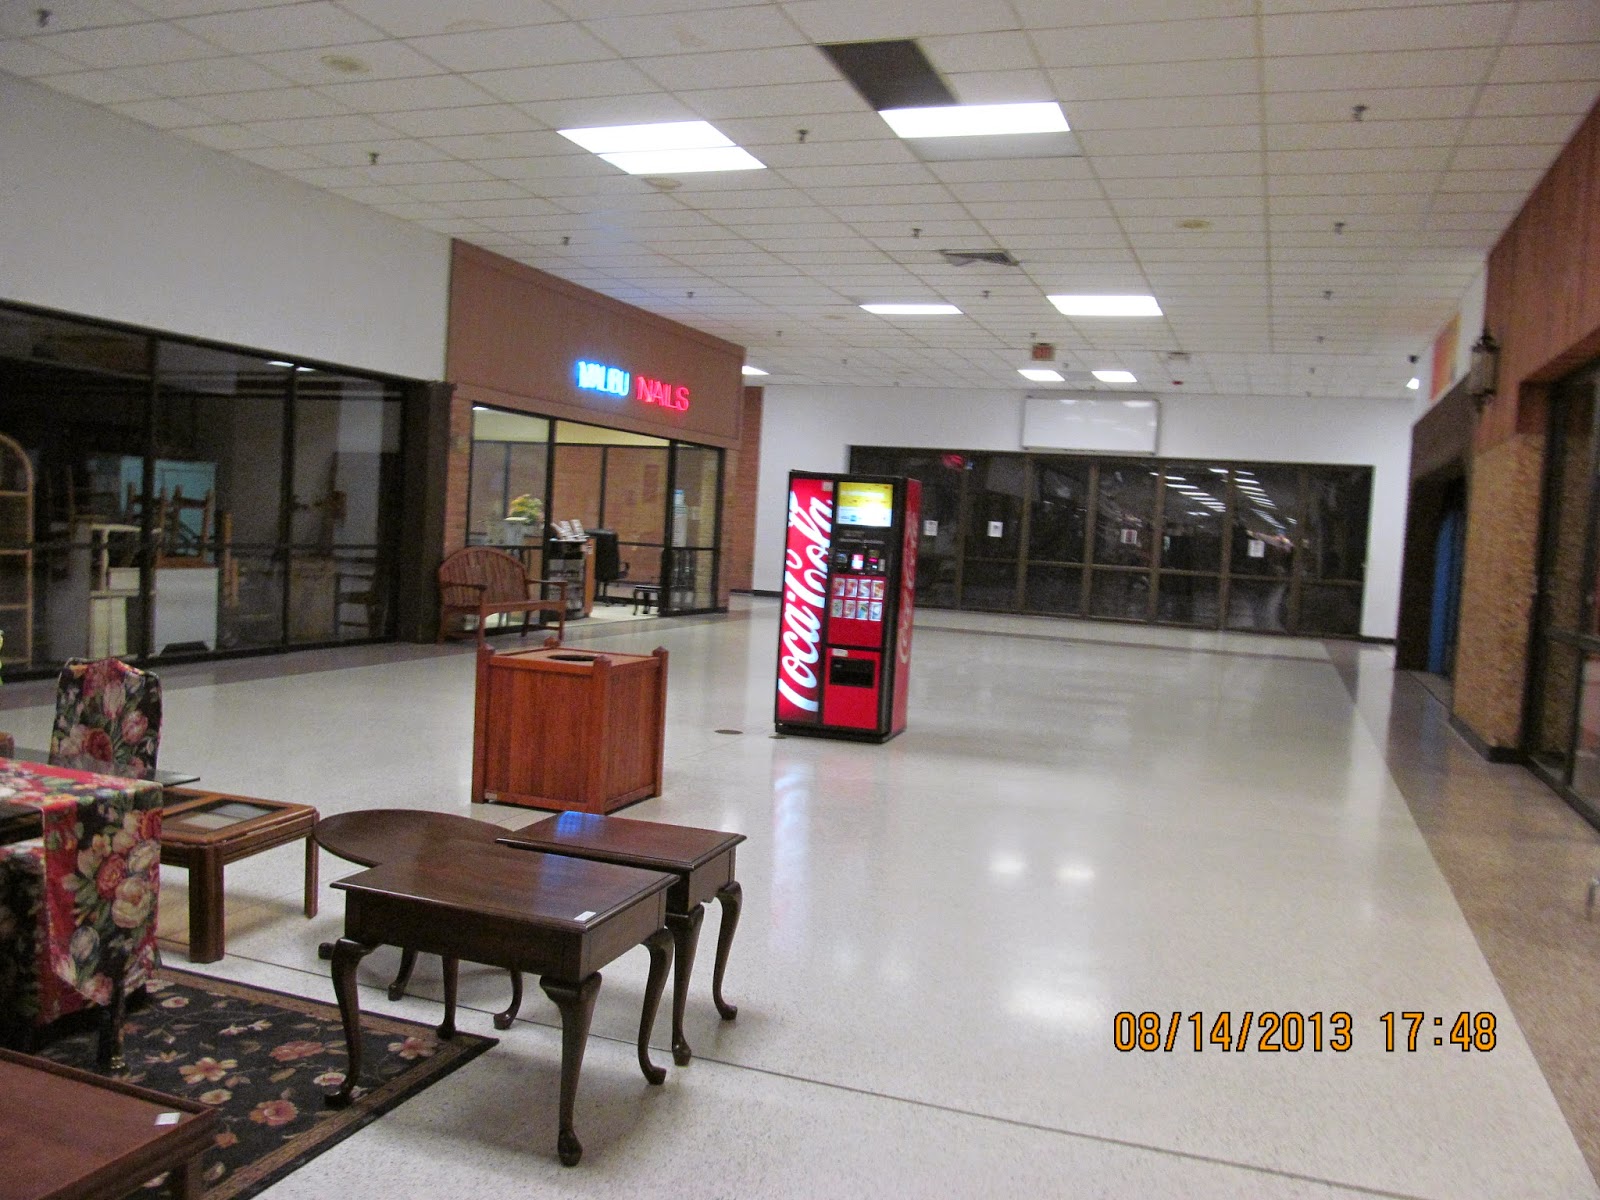 Trip to the Mall Village Mall (Effingham, IL)